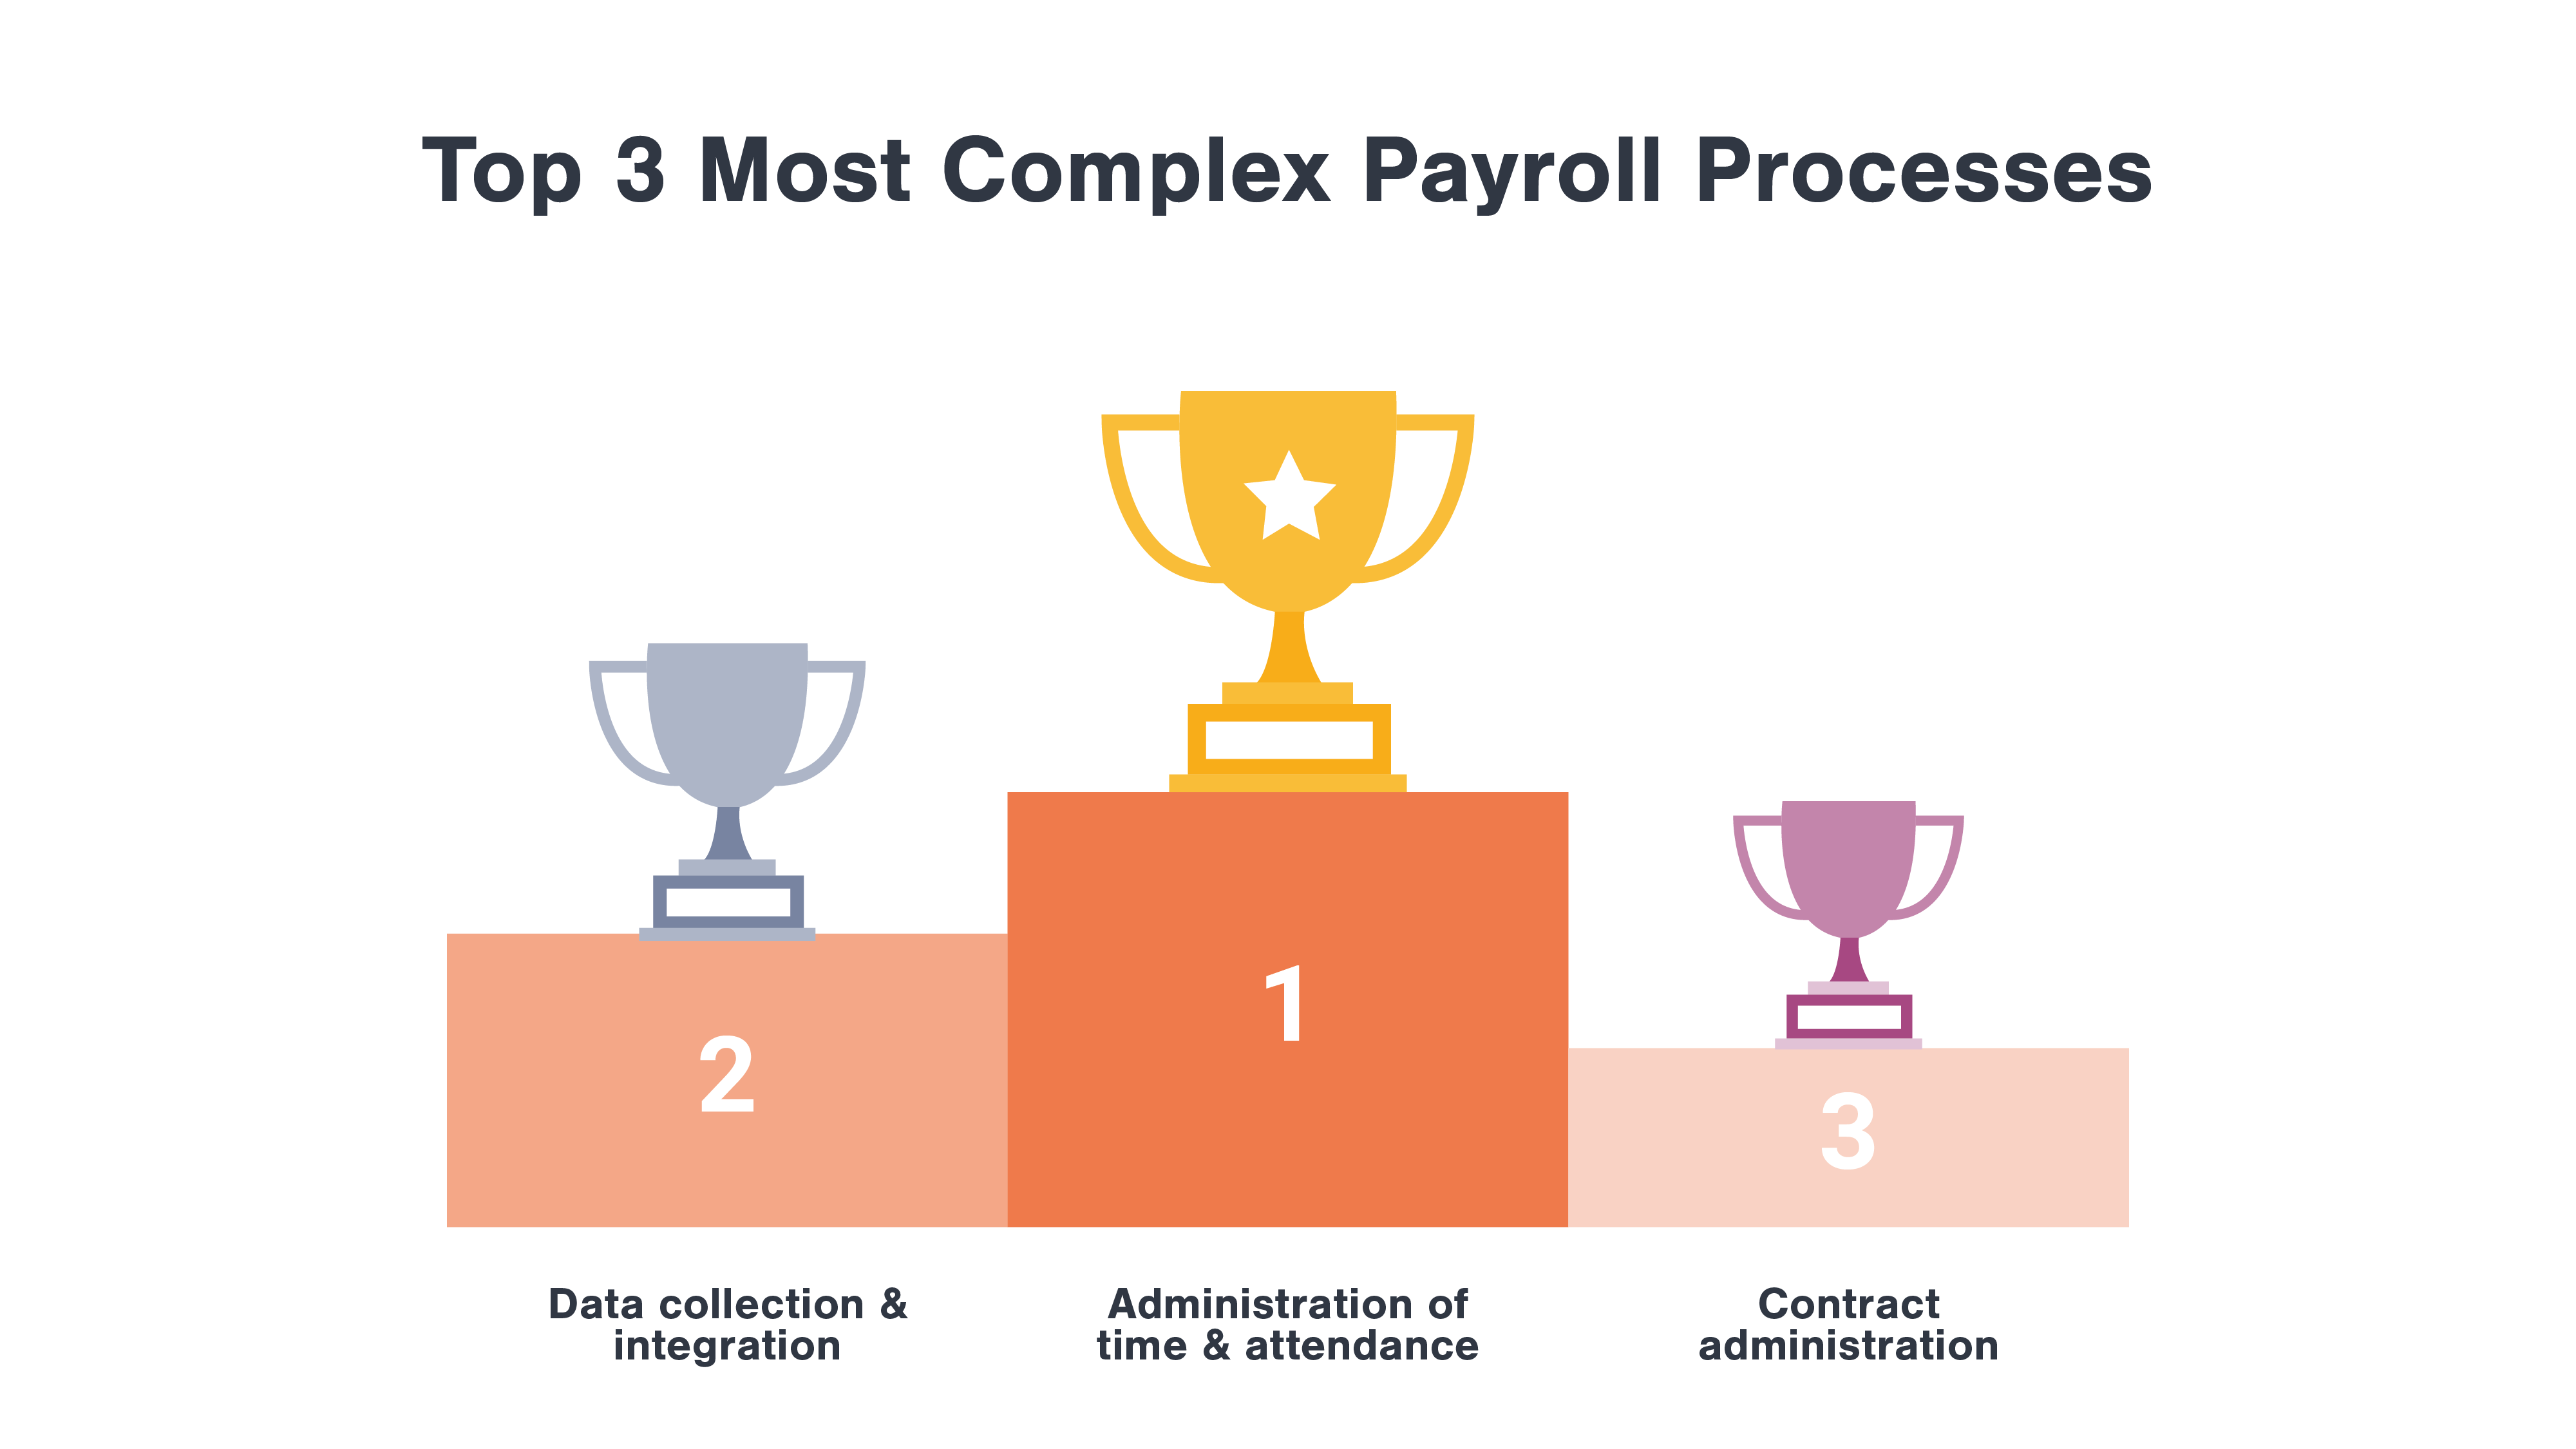 Top 3 Most Complex Payroll Processes